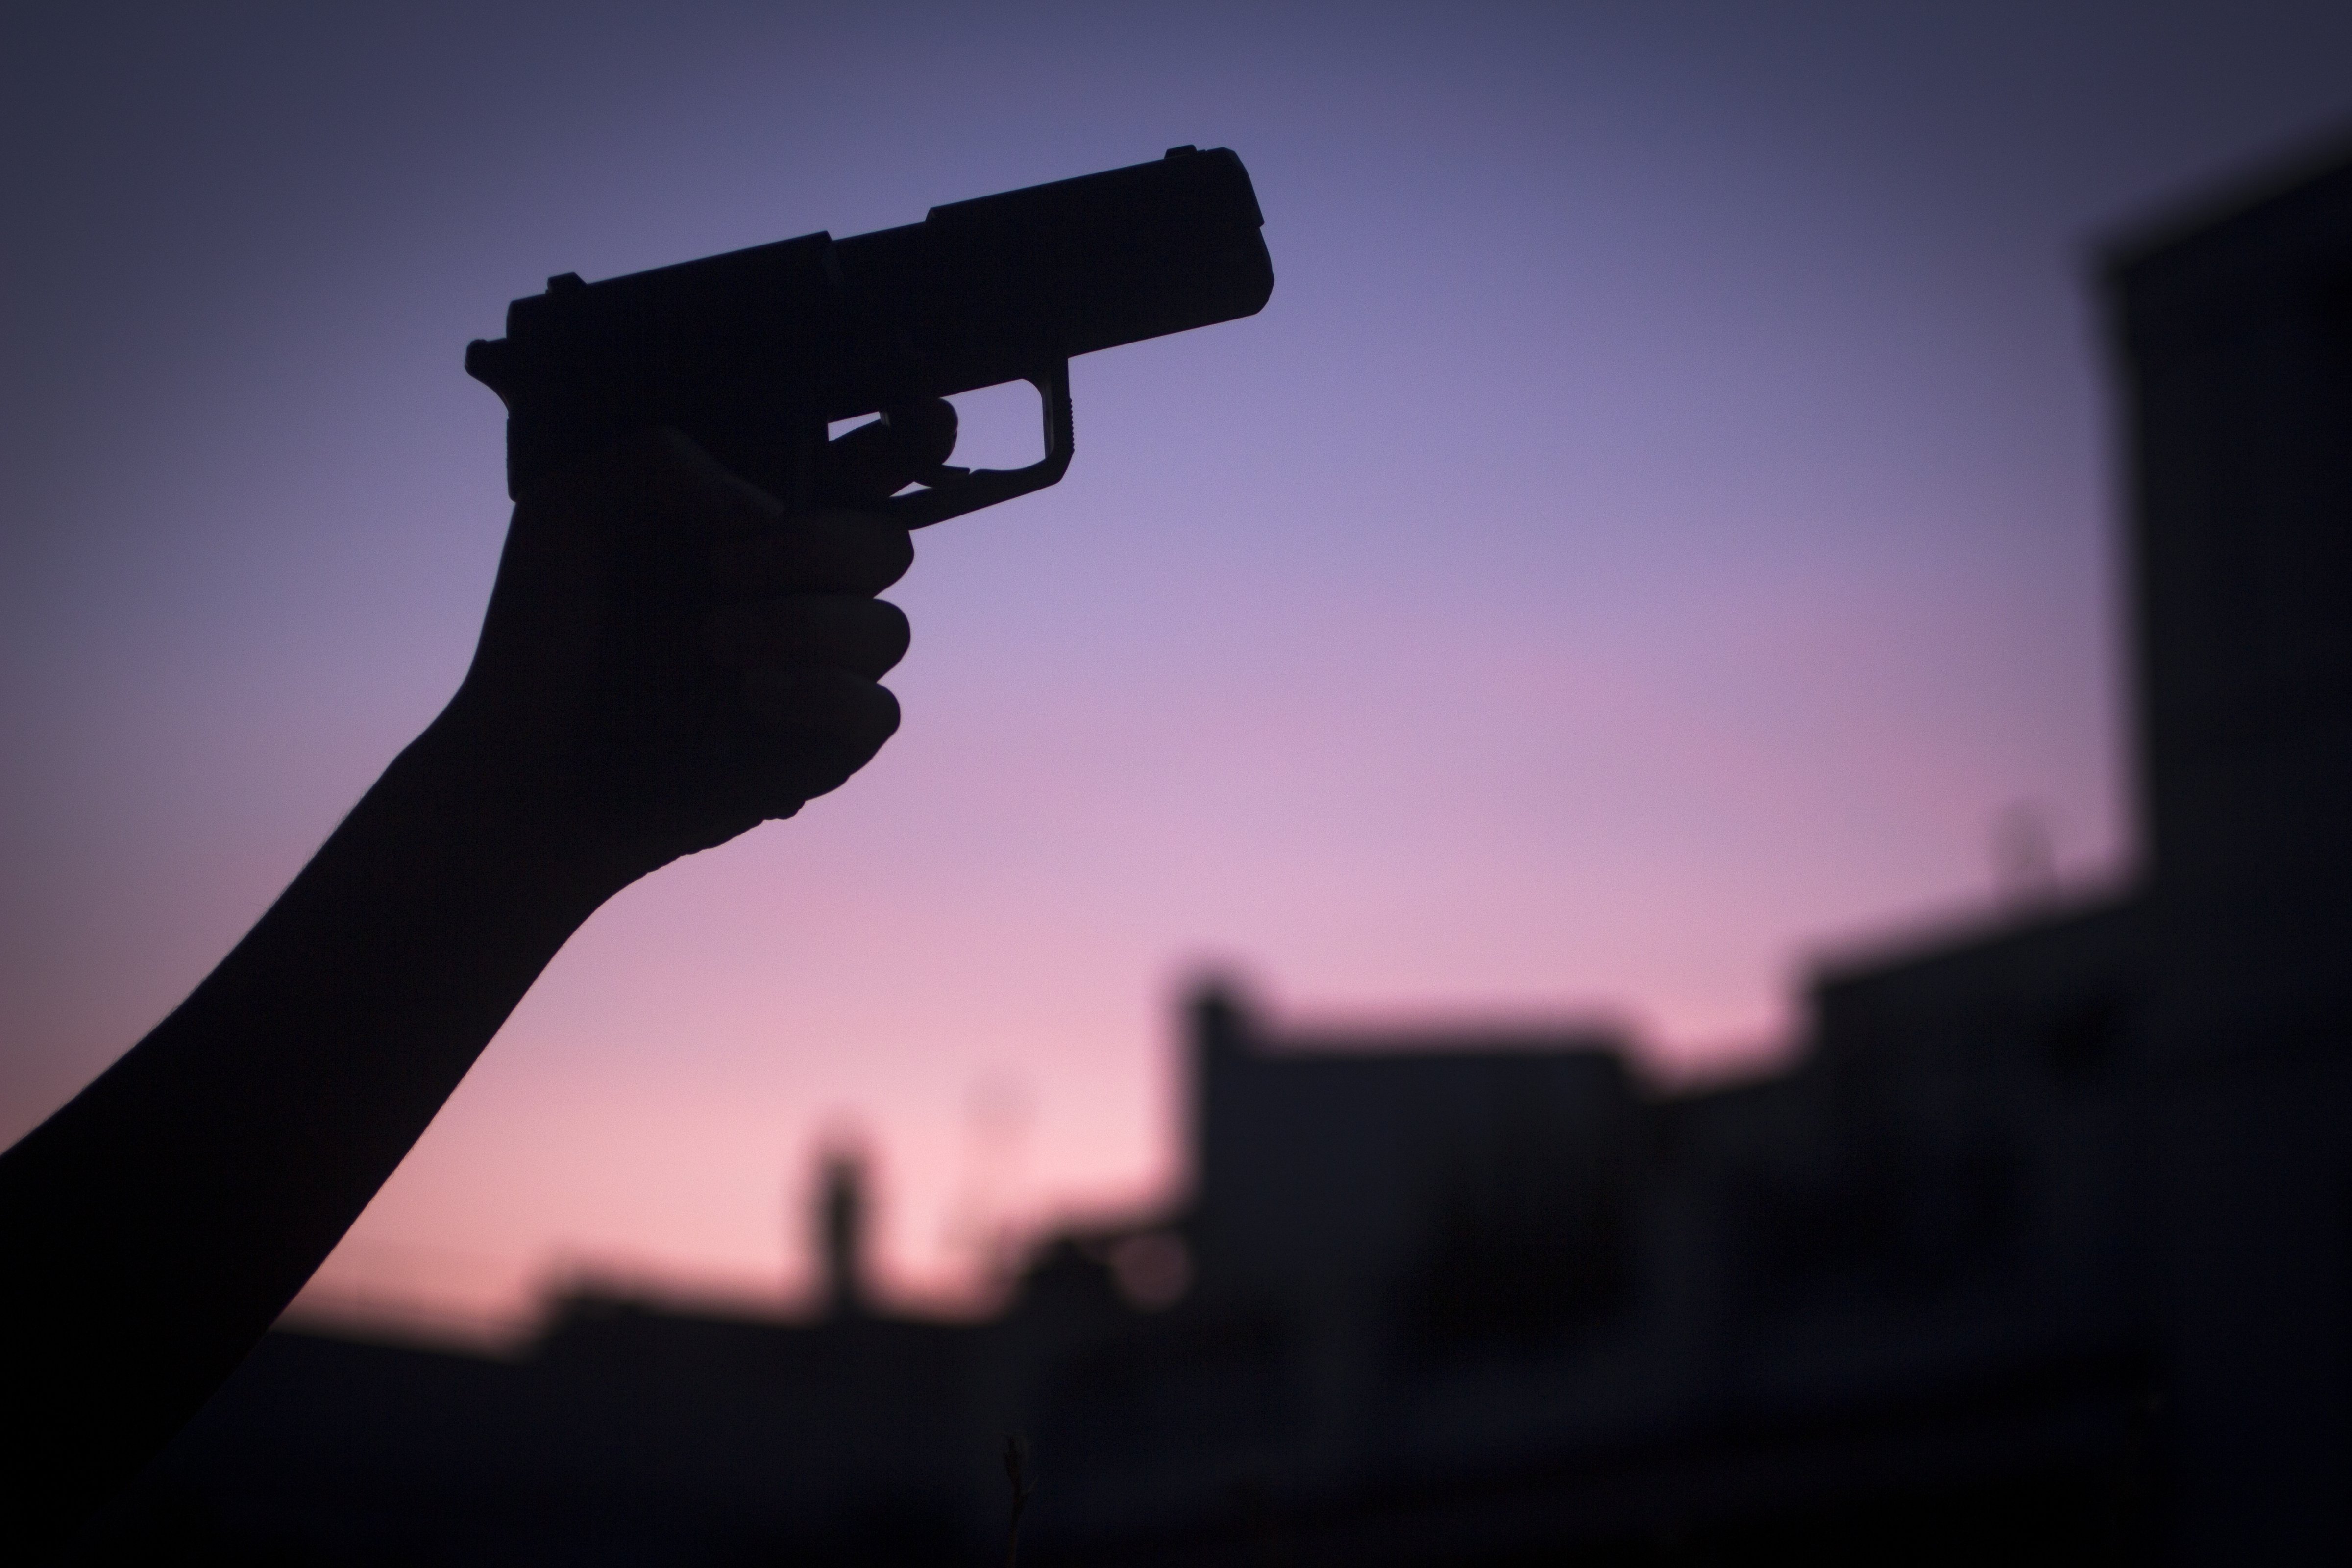 A new FBI report shows an increase in "active shooter" incidents, but that doesn't necessarily equate to more mass shootings, say criminologists. (Getty Images)